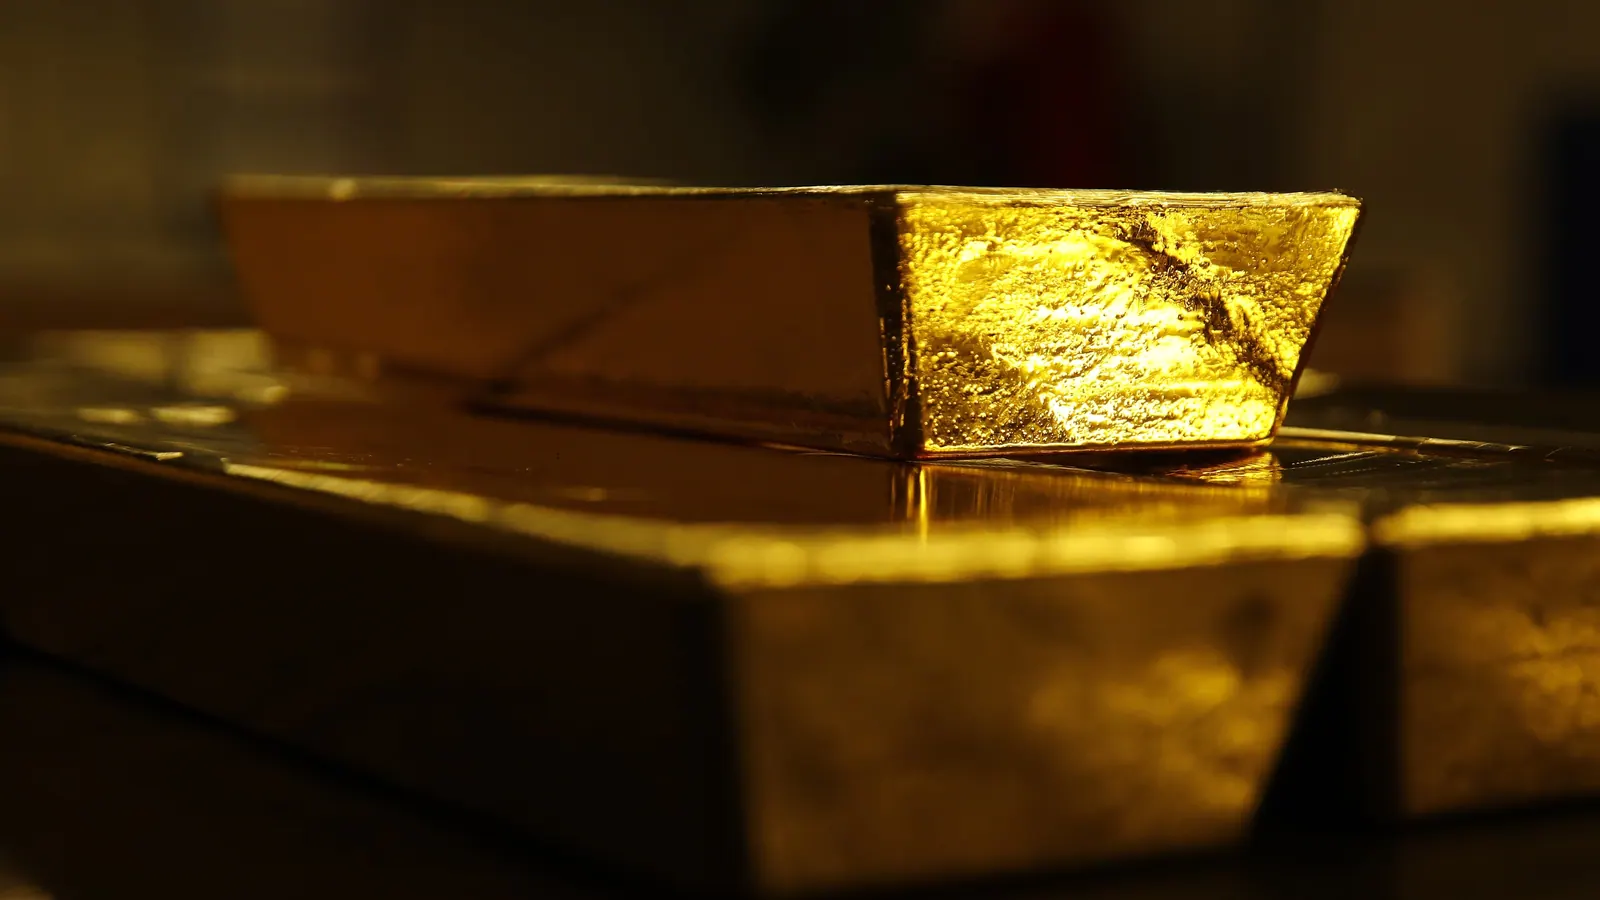 India’s gold imports zoomed 677% in May, highest year-on-year surge: Report